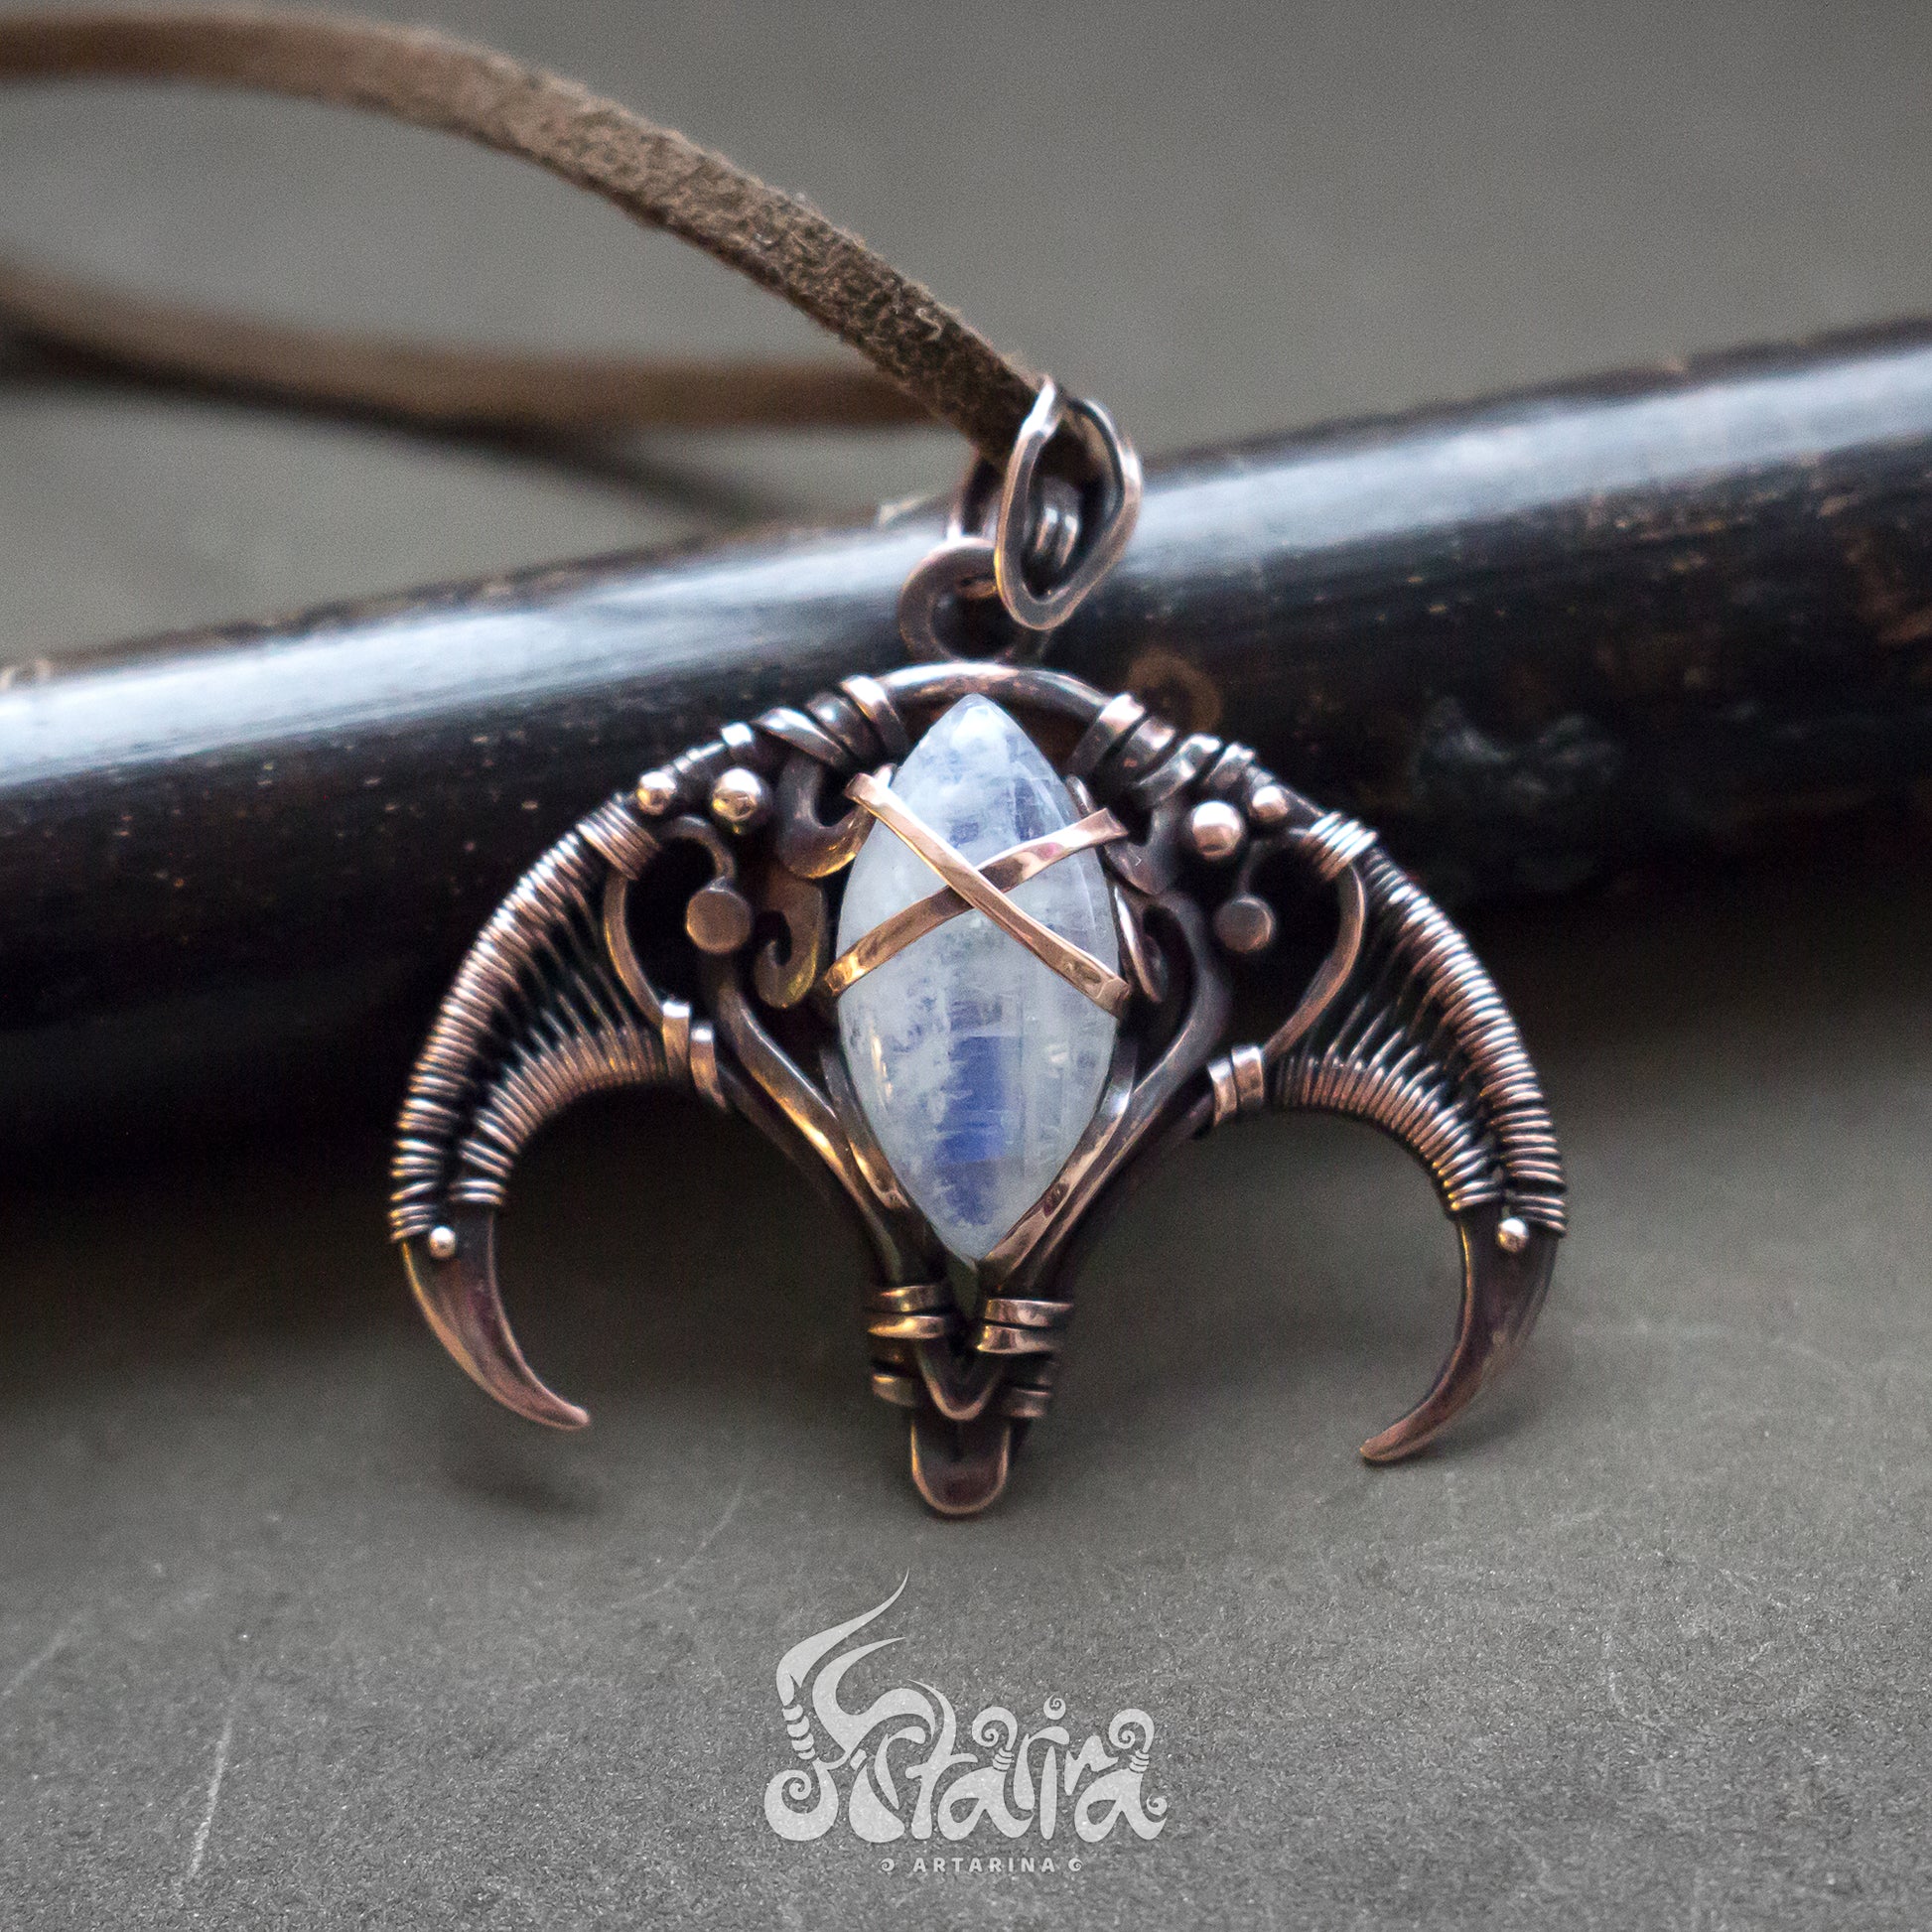 Alien necklace Heady wire wrapped biomechanical Giger inspired neck pendant Moonstone and Copper Rustic pendant Alternative jewelry